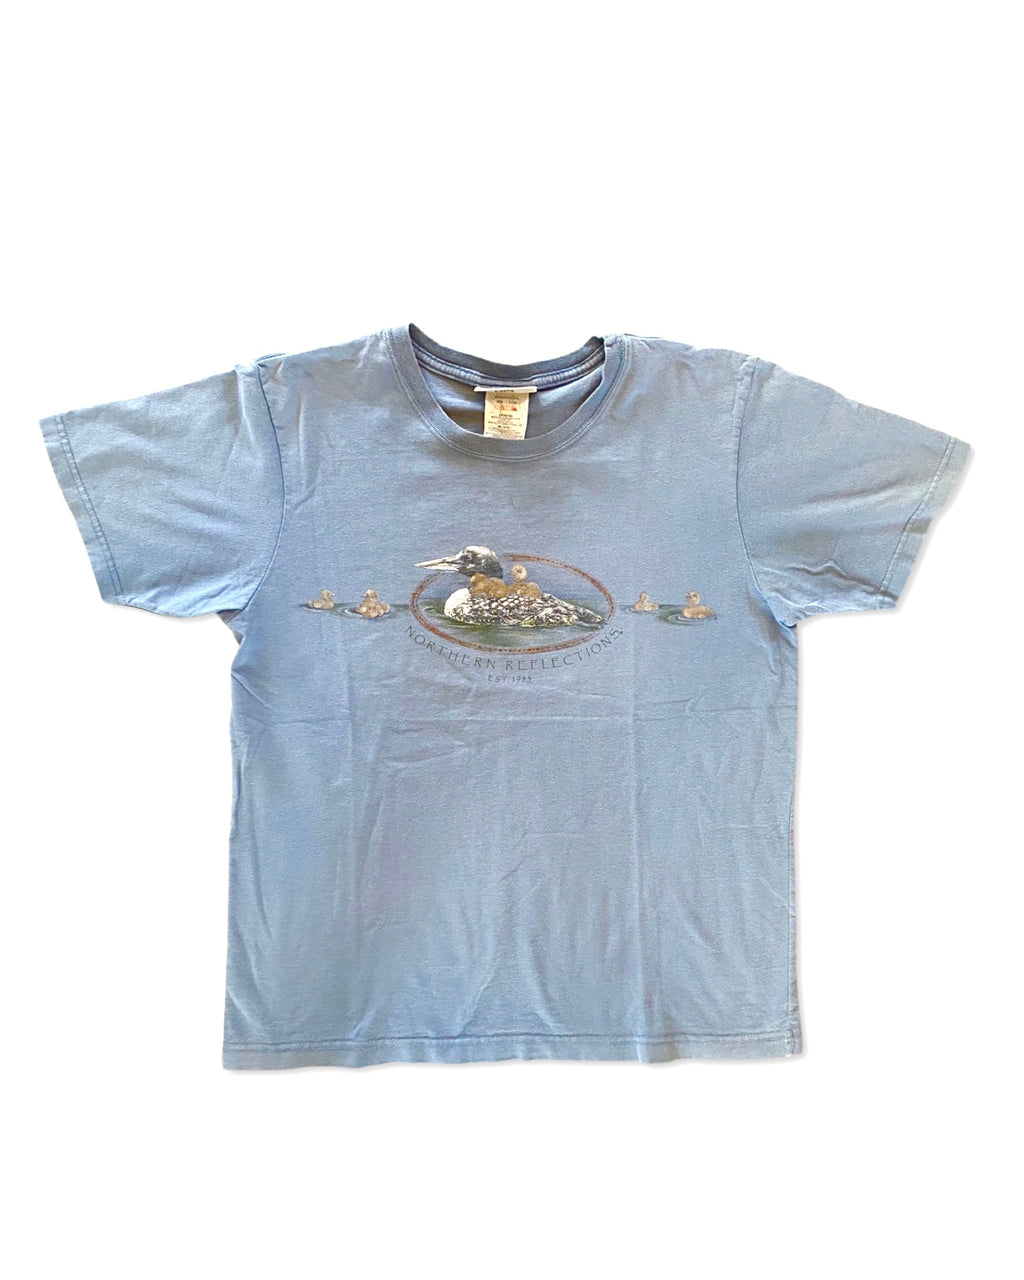 Vintage 90s Northern Reflections Duck T-Shirt